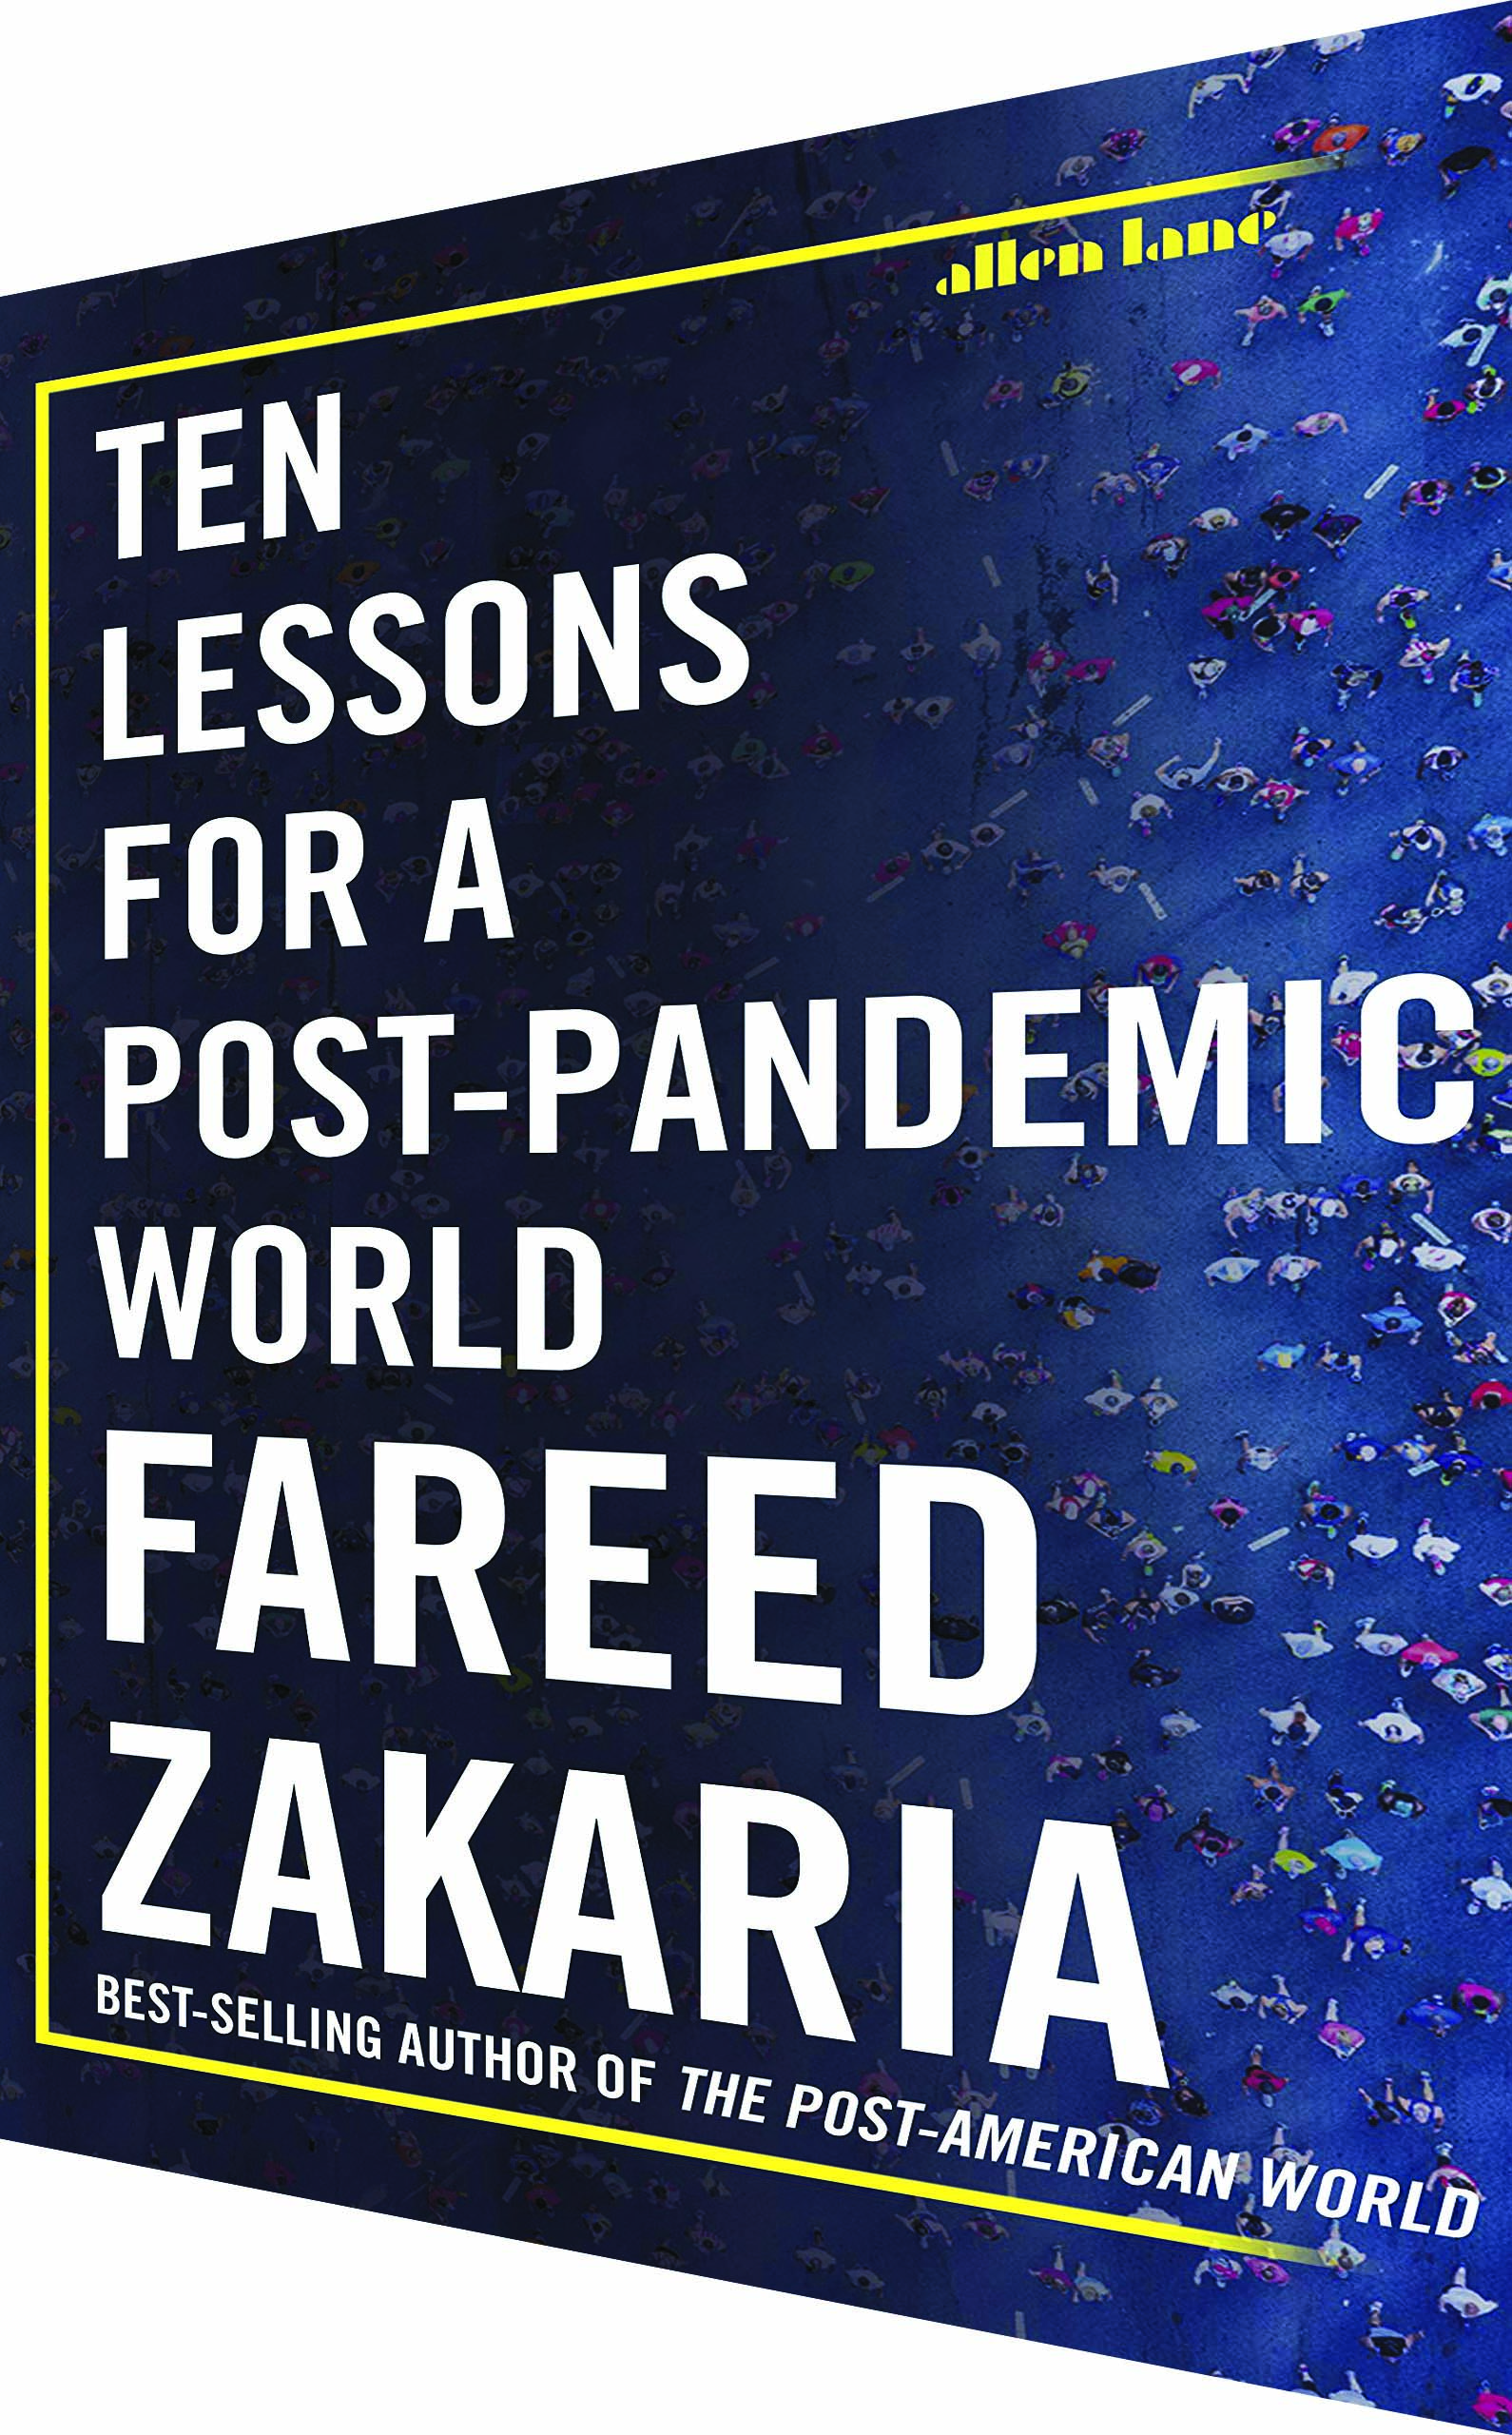 Ten lessons for a post-pandemic world